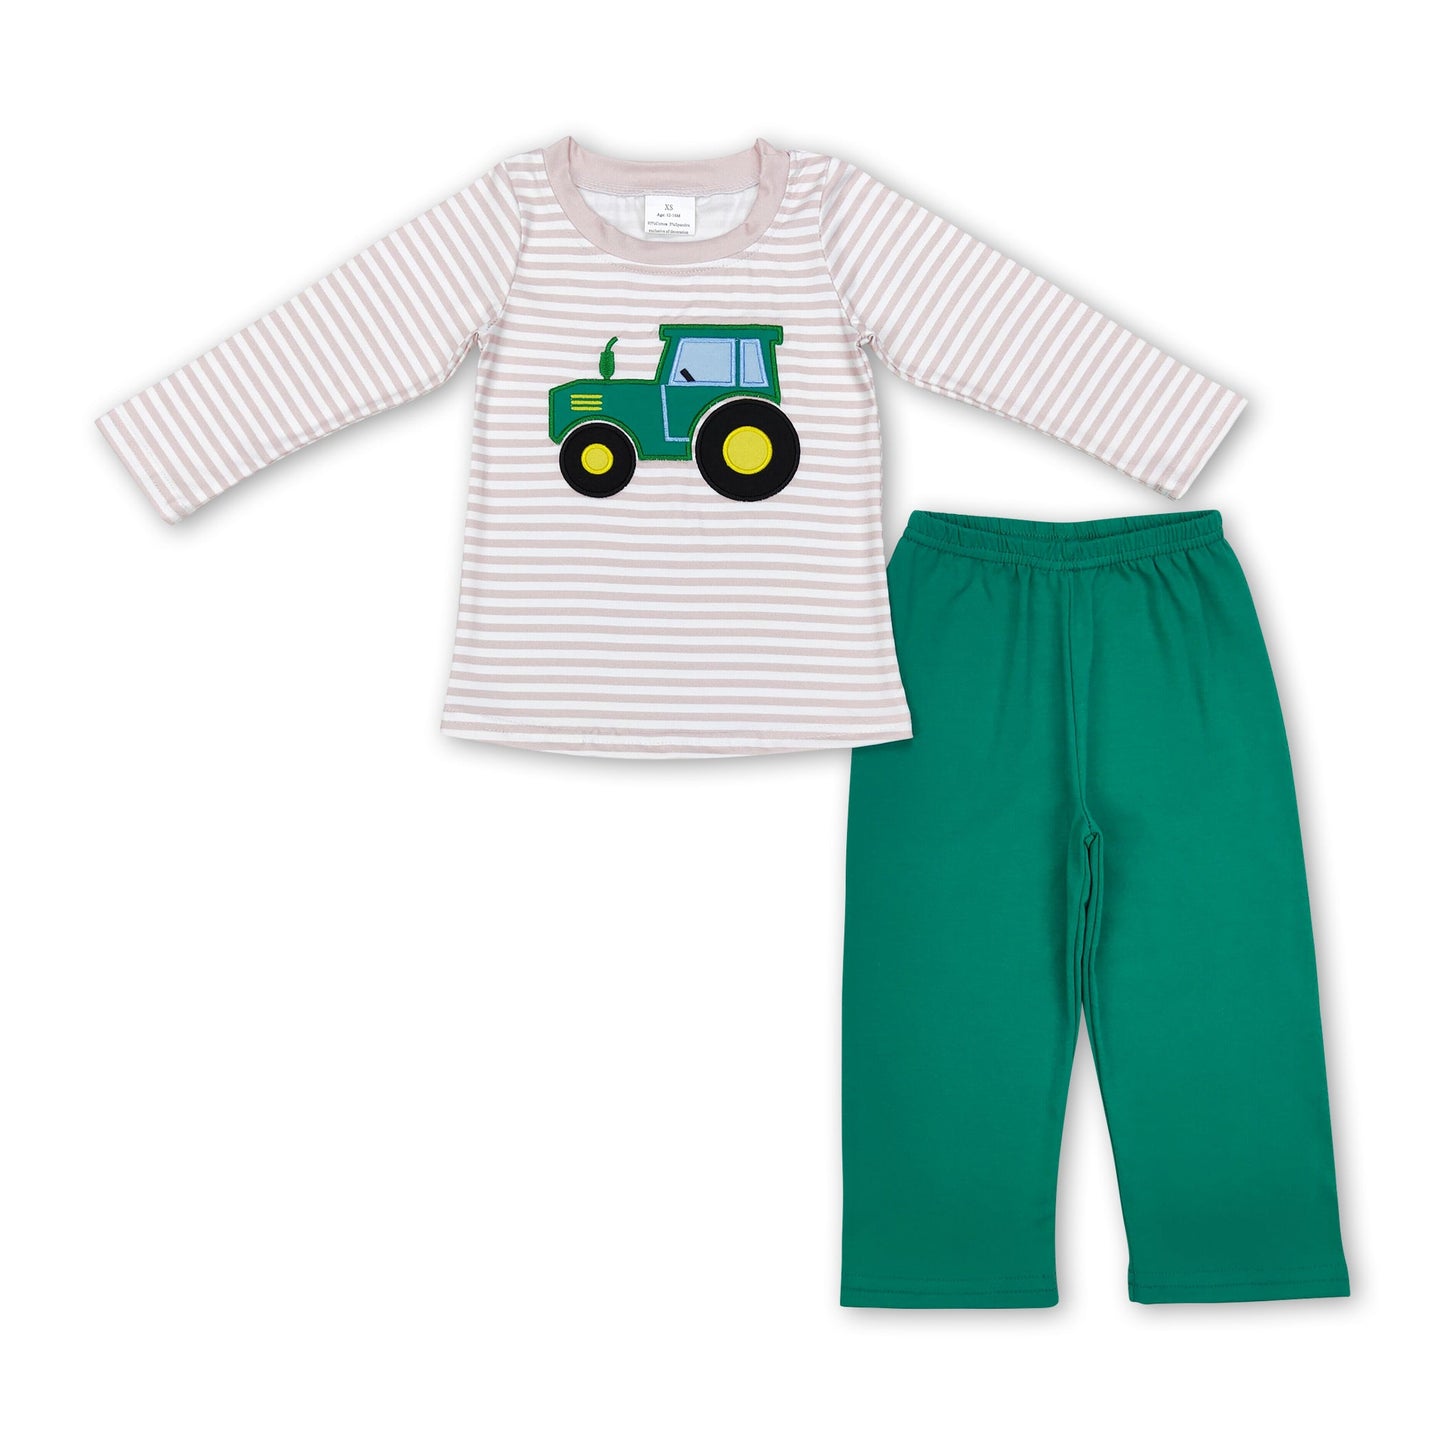 Stripe tractor top green pants kids boy outfits